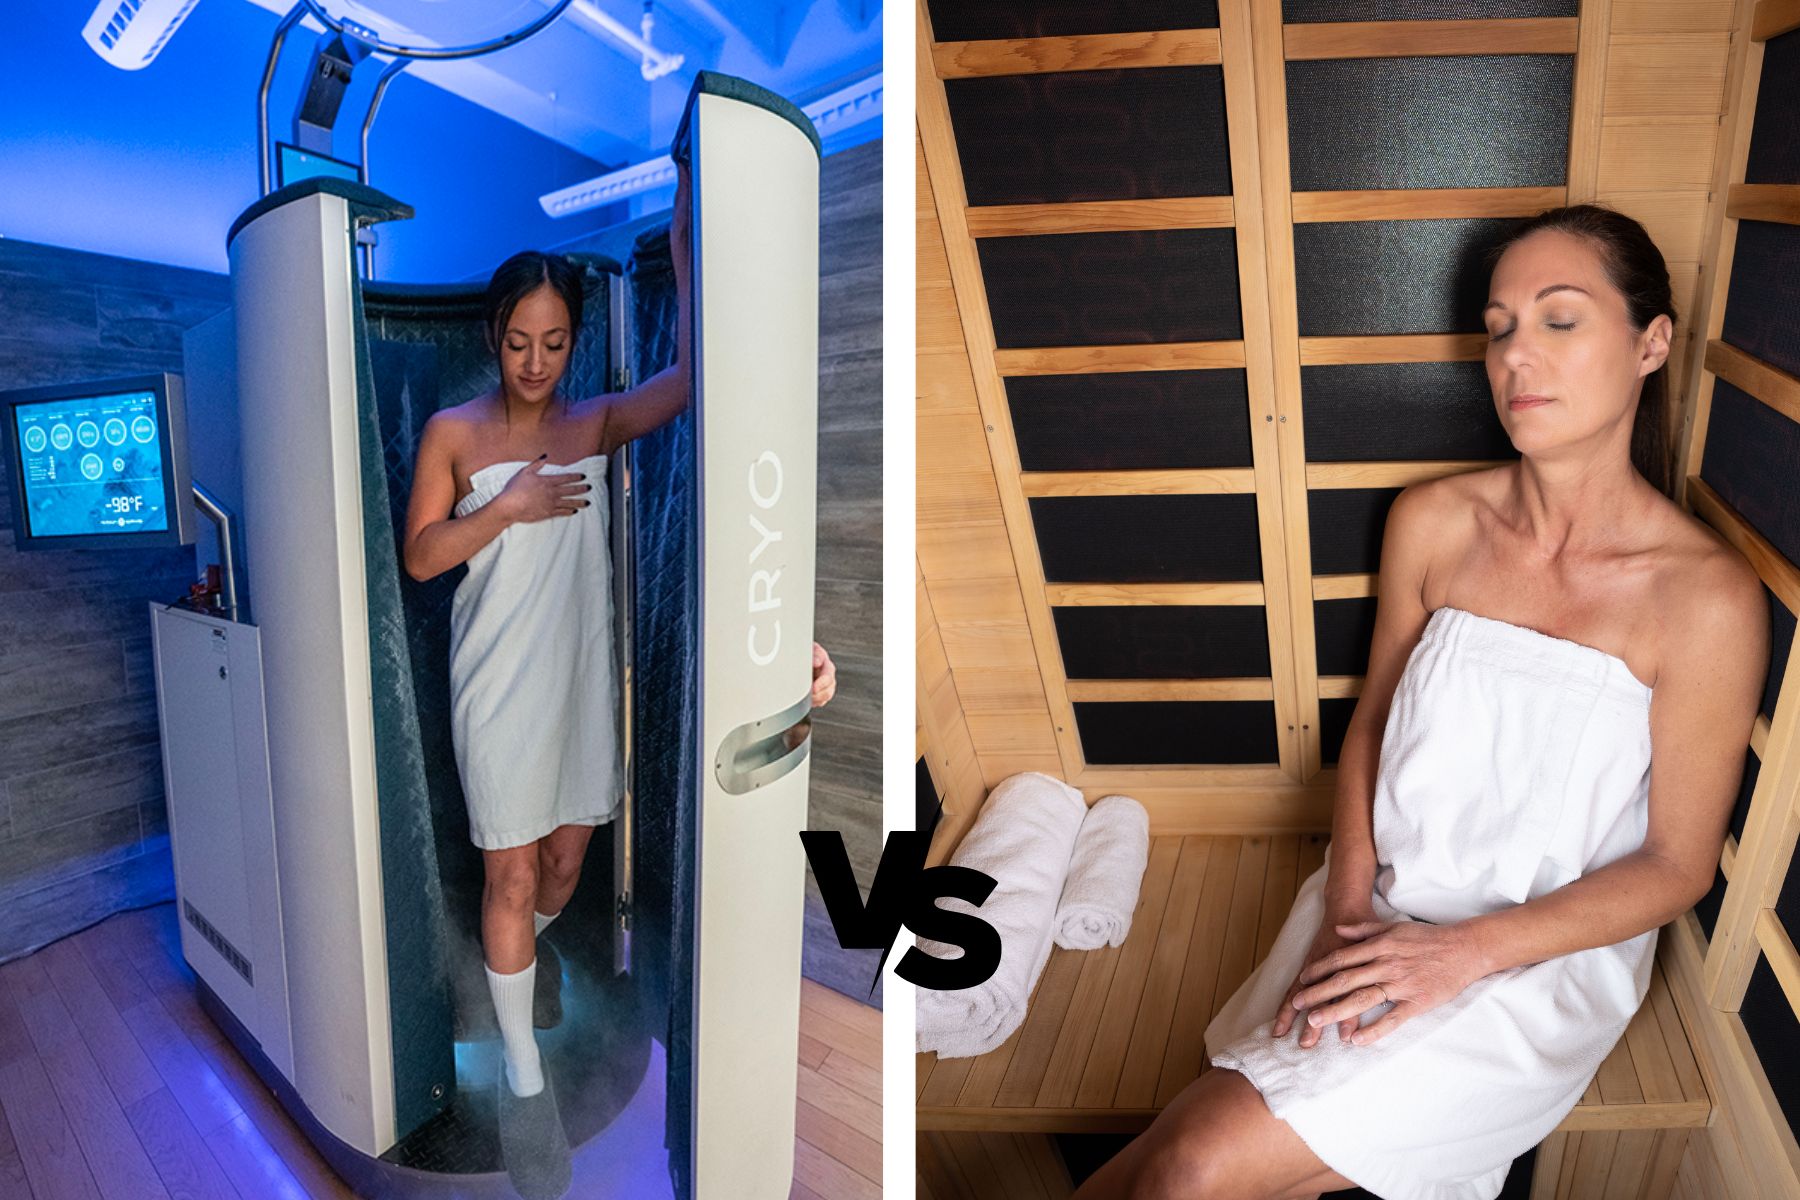 woman stepping out of a cryo machine and a woman inside an infrared sauna